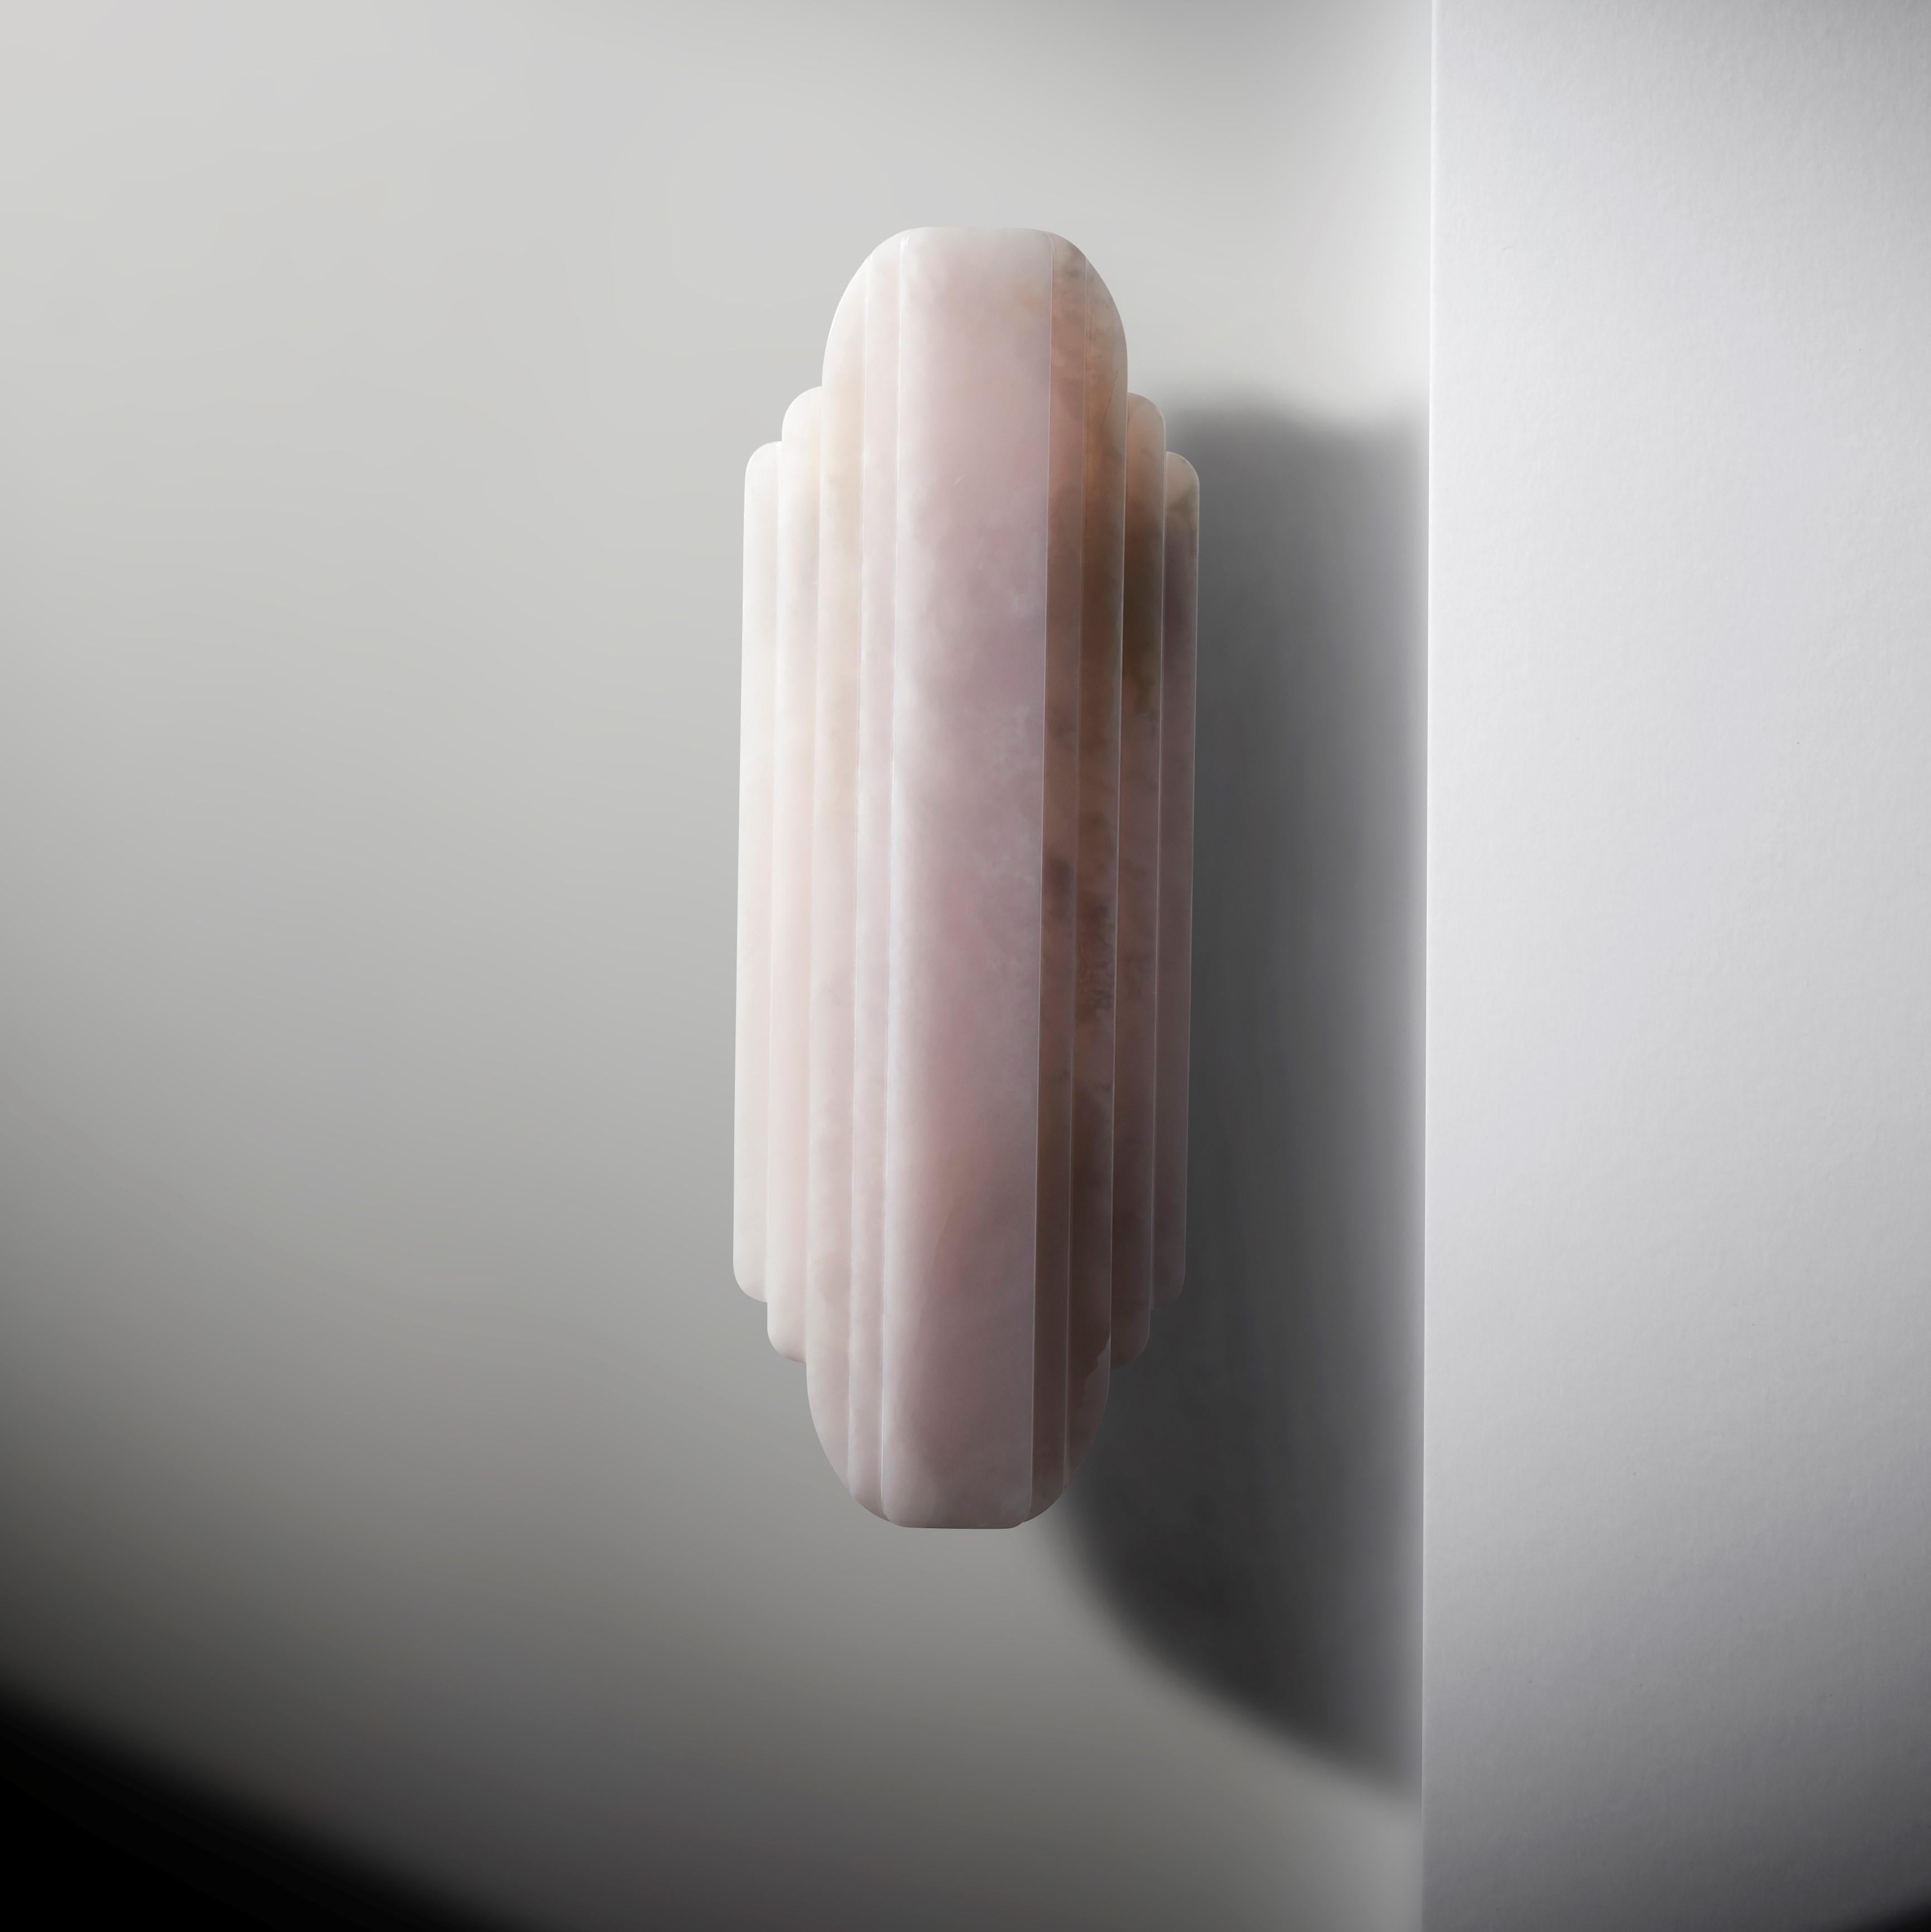 Walljewel by Lisette Rützou
Dimensions: 15 x H 42 cm
Materials: Rose, green and white onyx.

 Lisette Rützou’s design is motivated by an urge to articulate a story. Inspired by the beauty of materials, form and architecture, each design is an